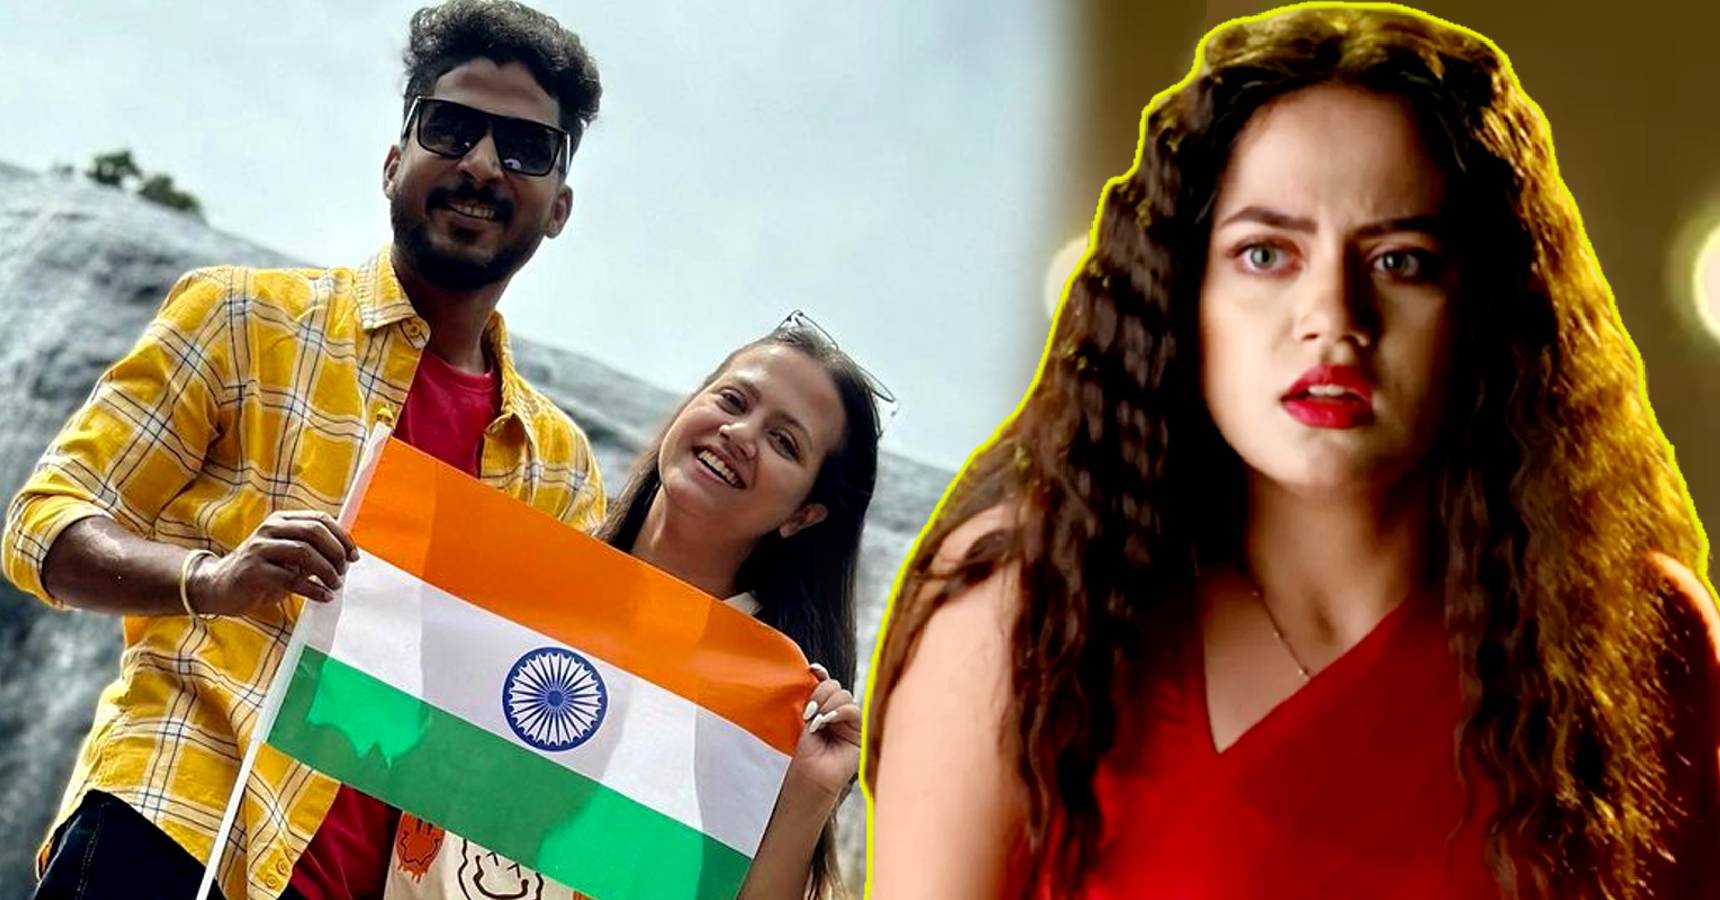 Anurager Chhowa Mishka actress Ahona Dutta trolled on Independence Day